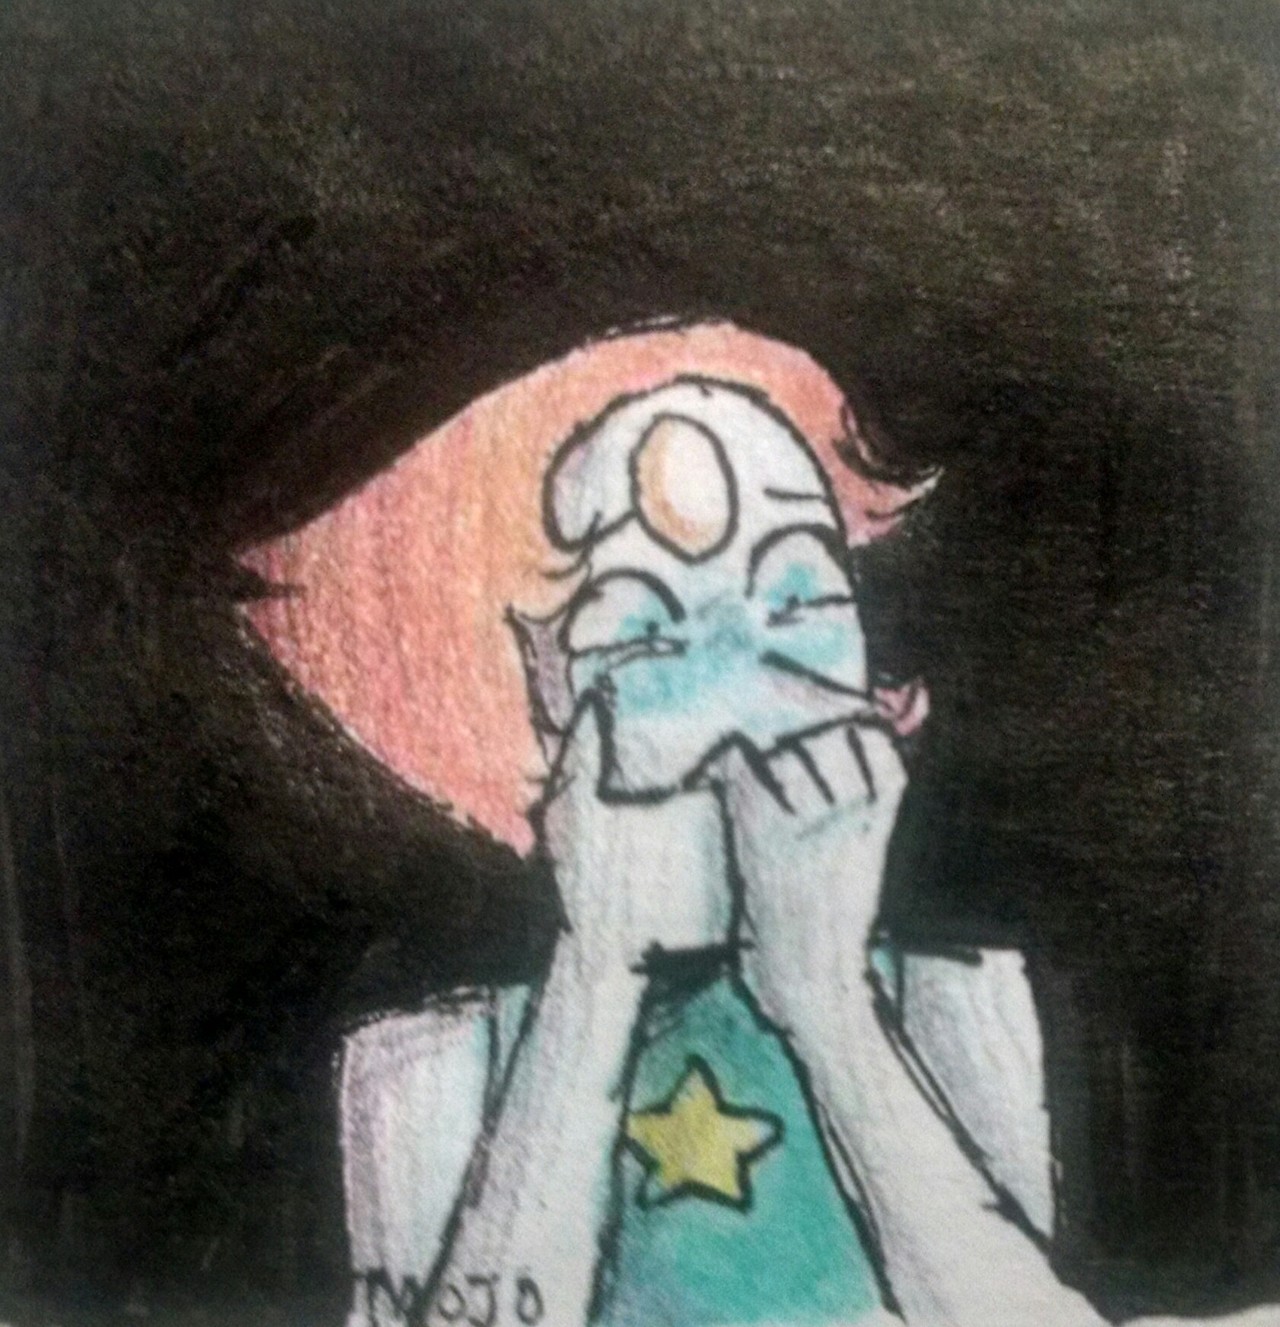 I’ve seen the new episodes and I want to know what Pearl was going to say.